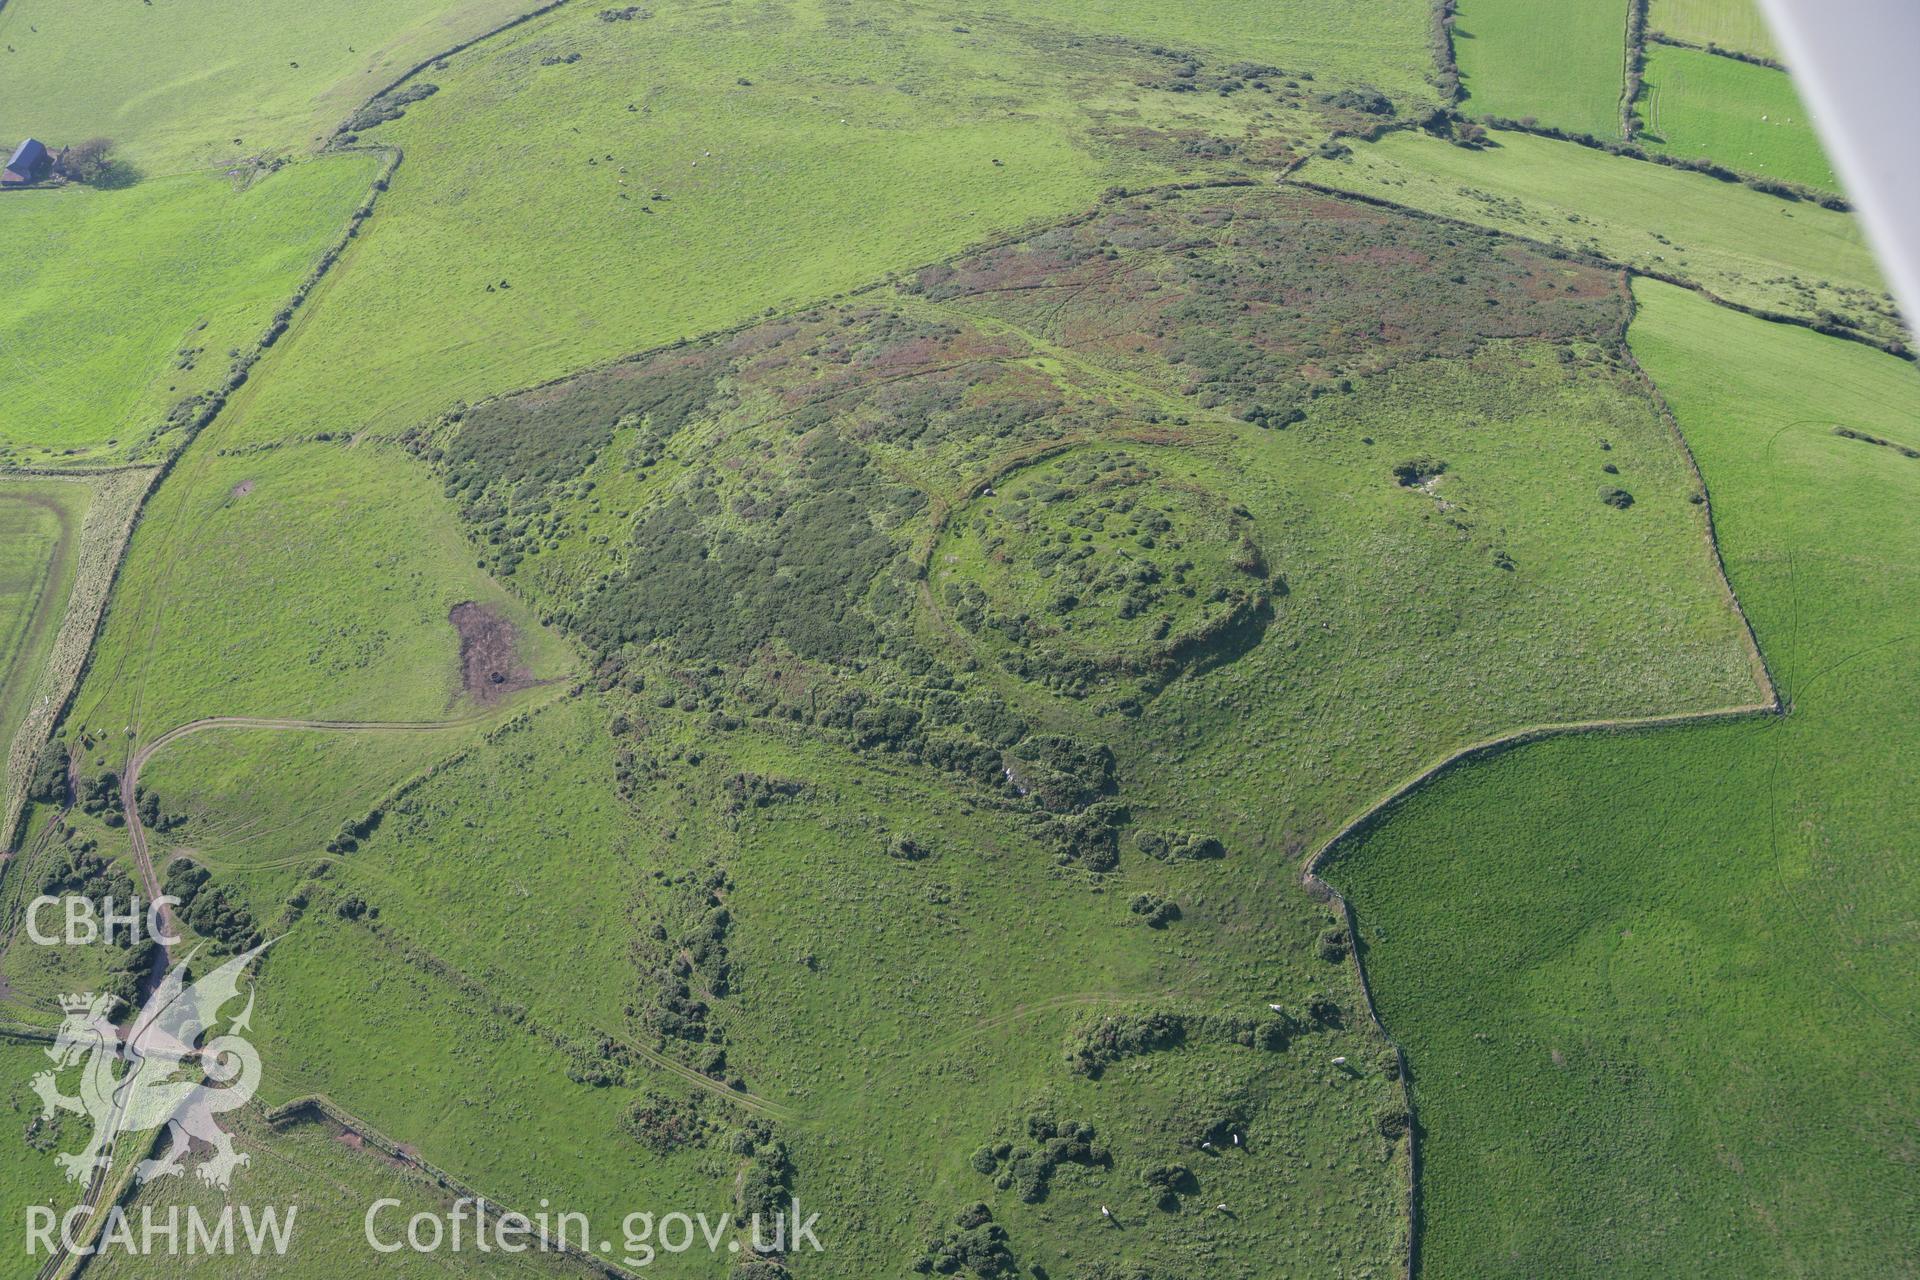 RCAHMW colour oblique aerial photograph of Castell Odo. Taken on 06 September 2007 by Toby Driver